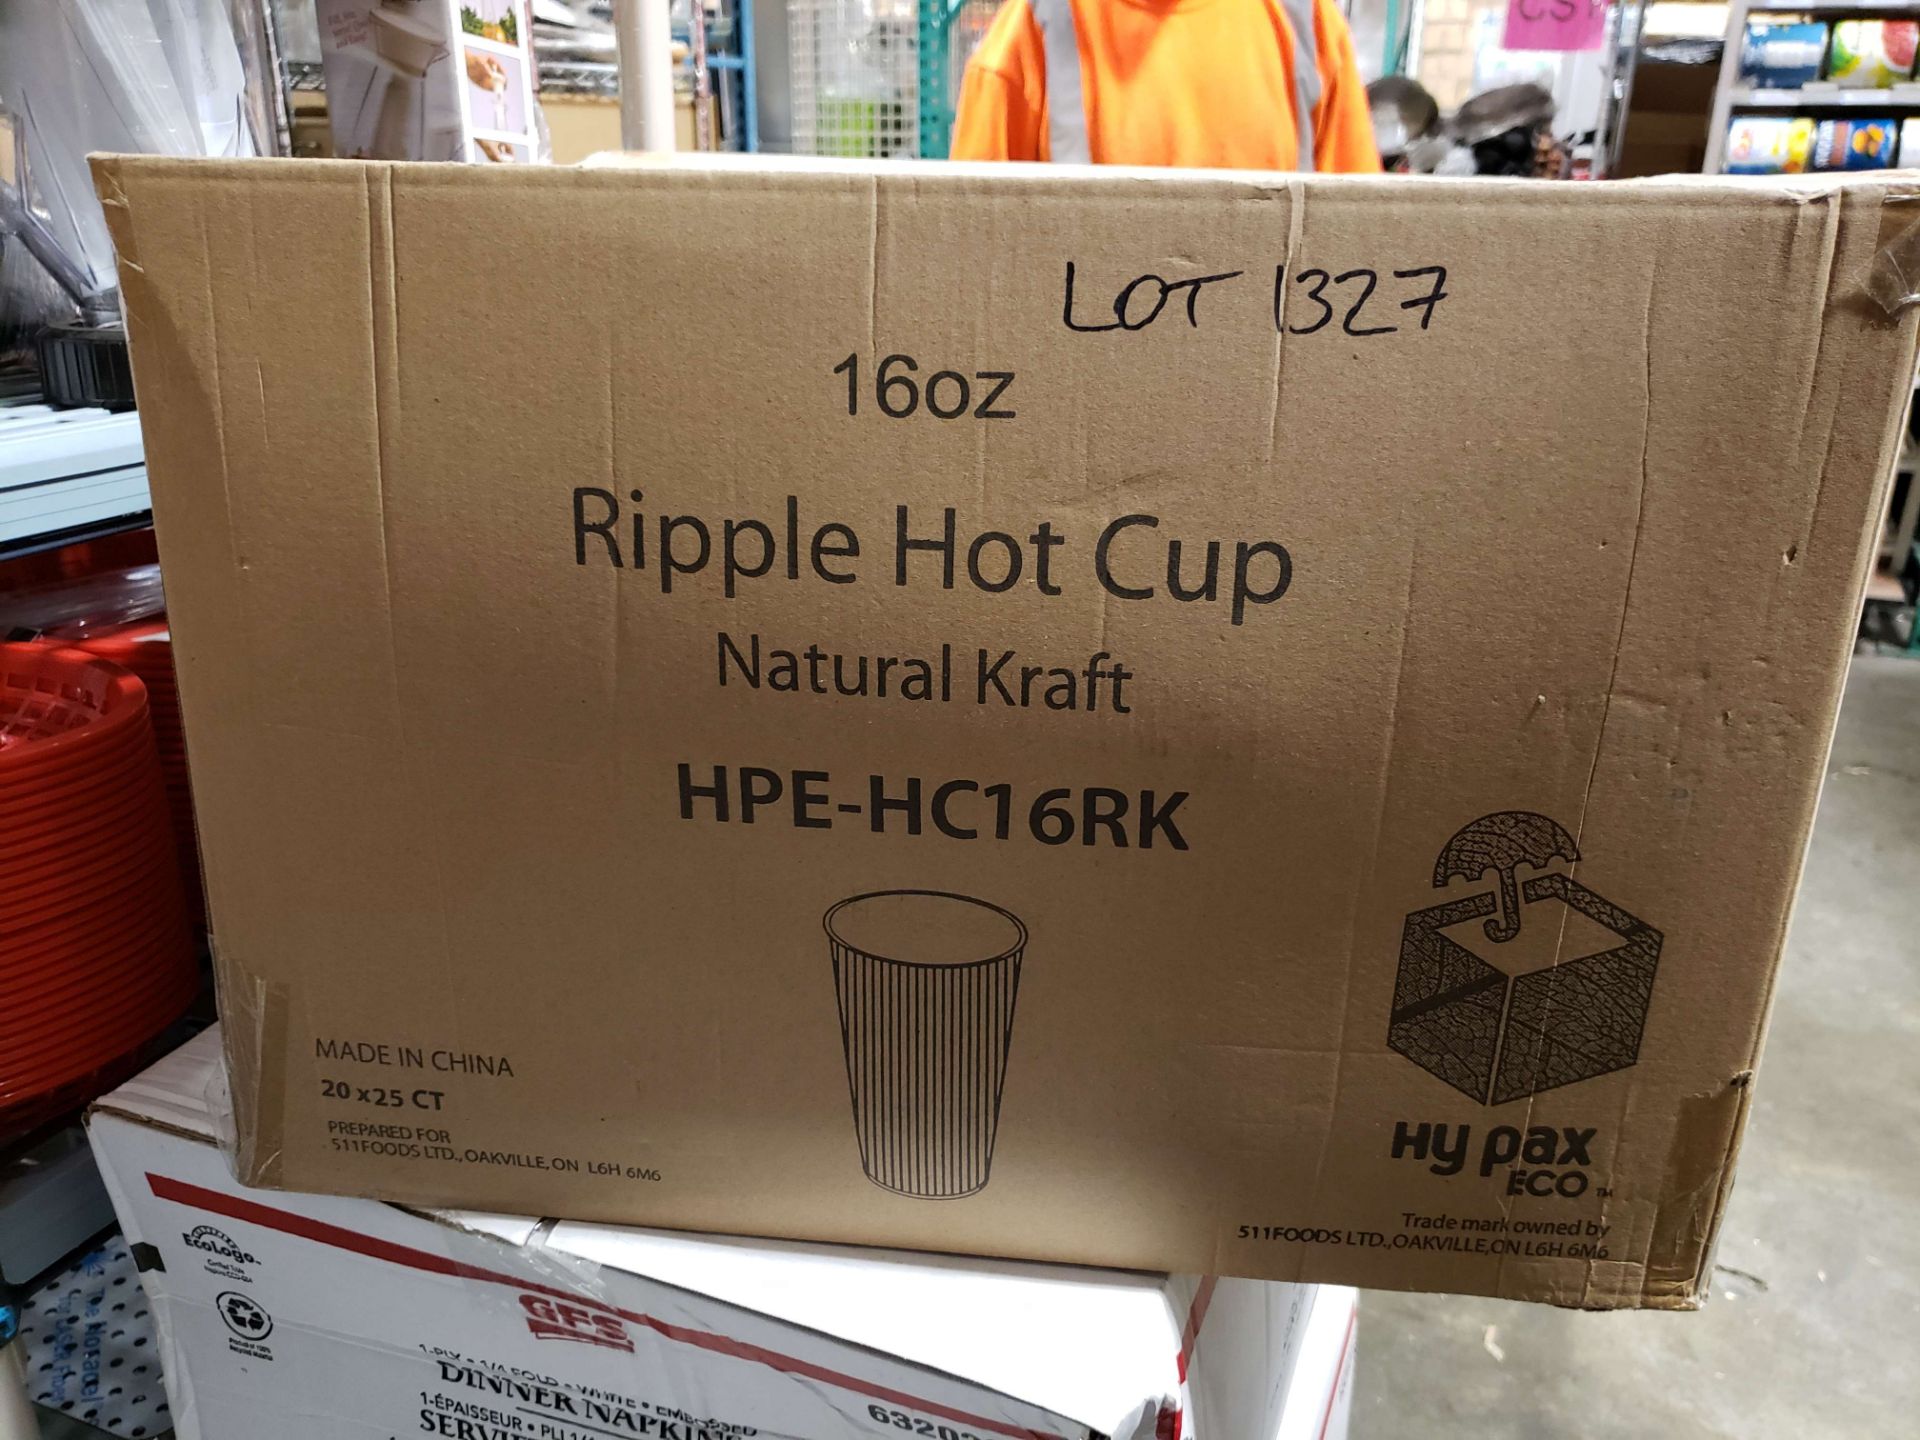 16oz Ripple Hot Cups - Case of 20 x 25